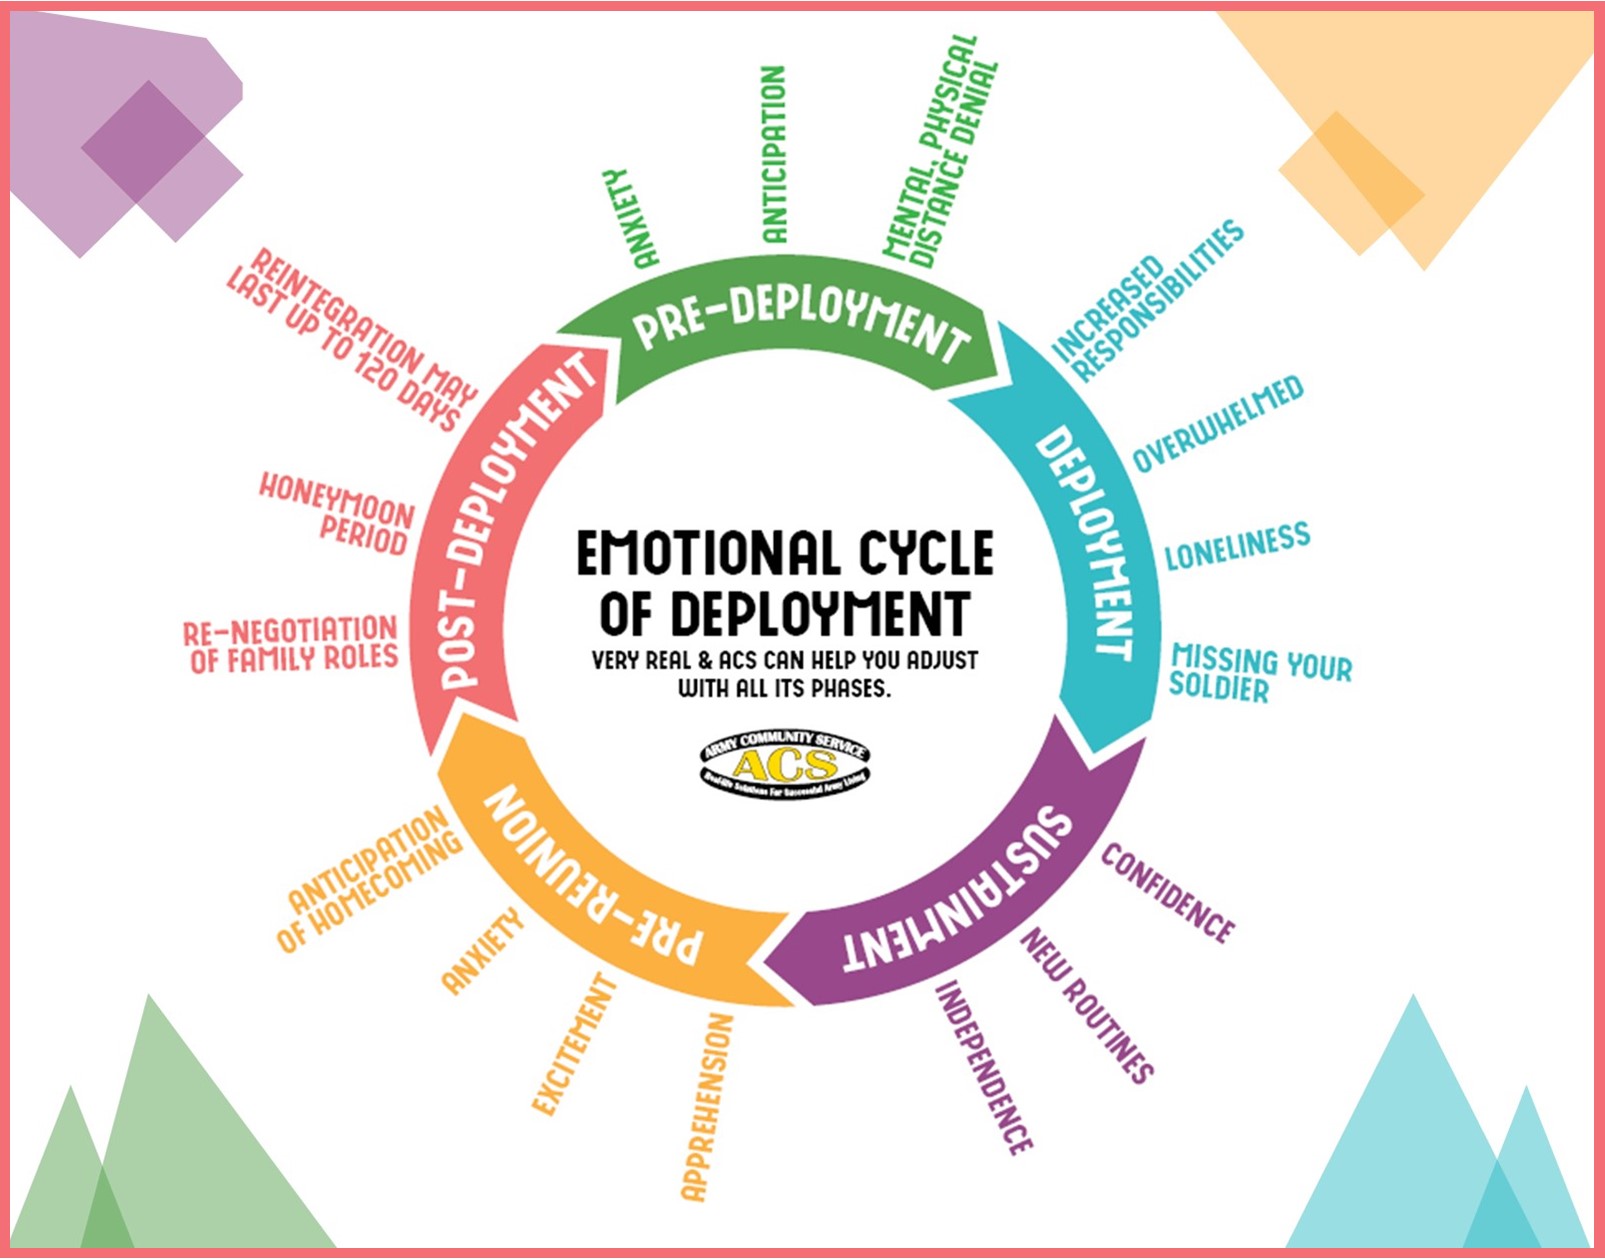 Emotional Cycle of Deployment